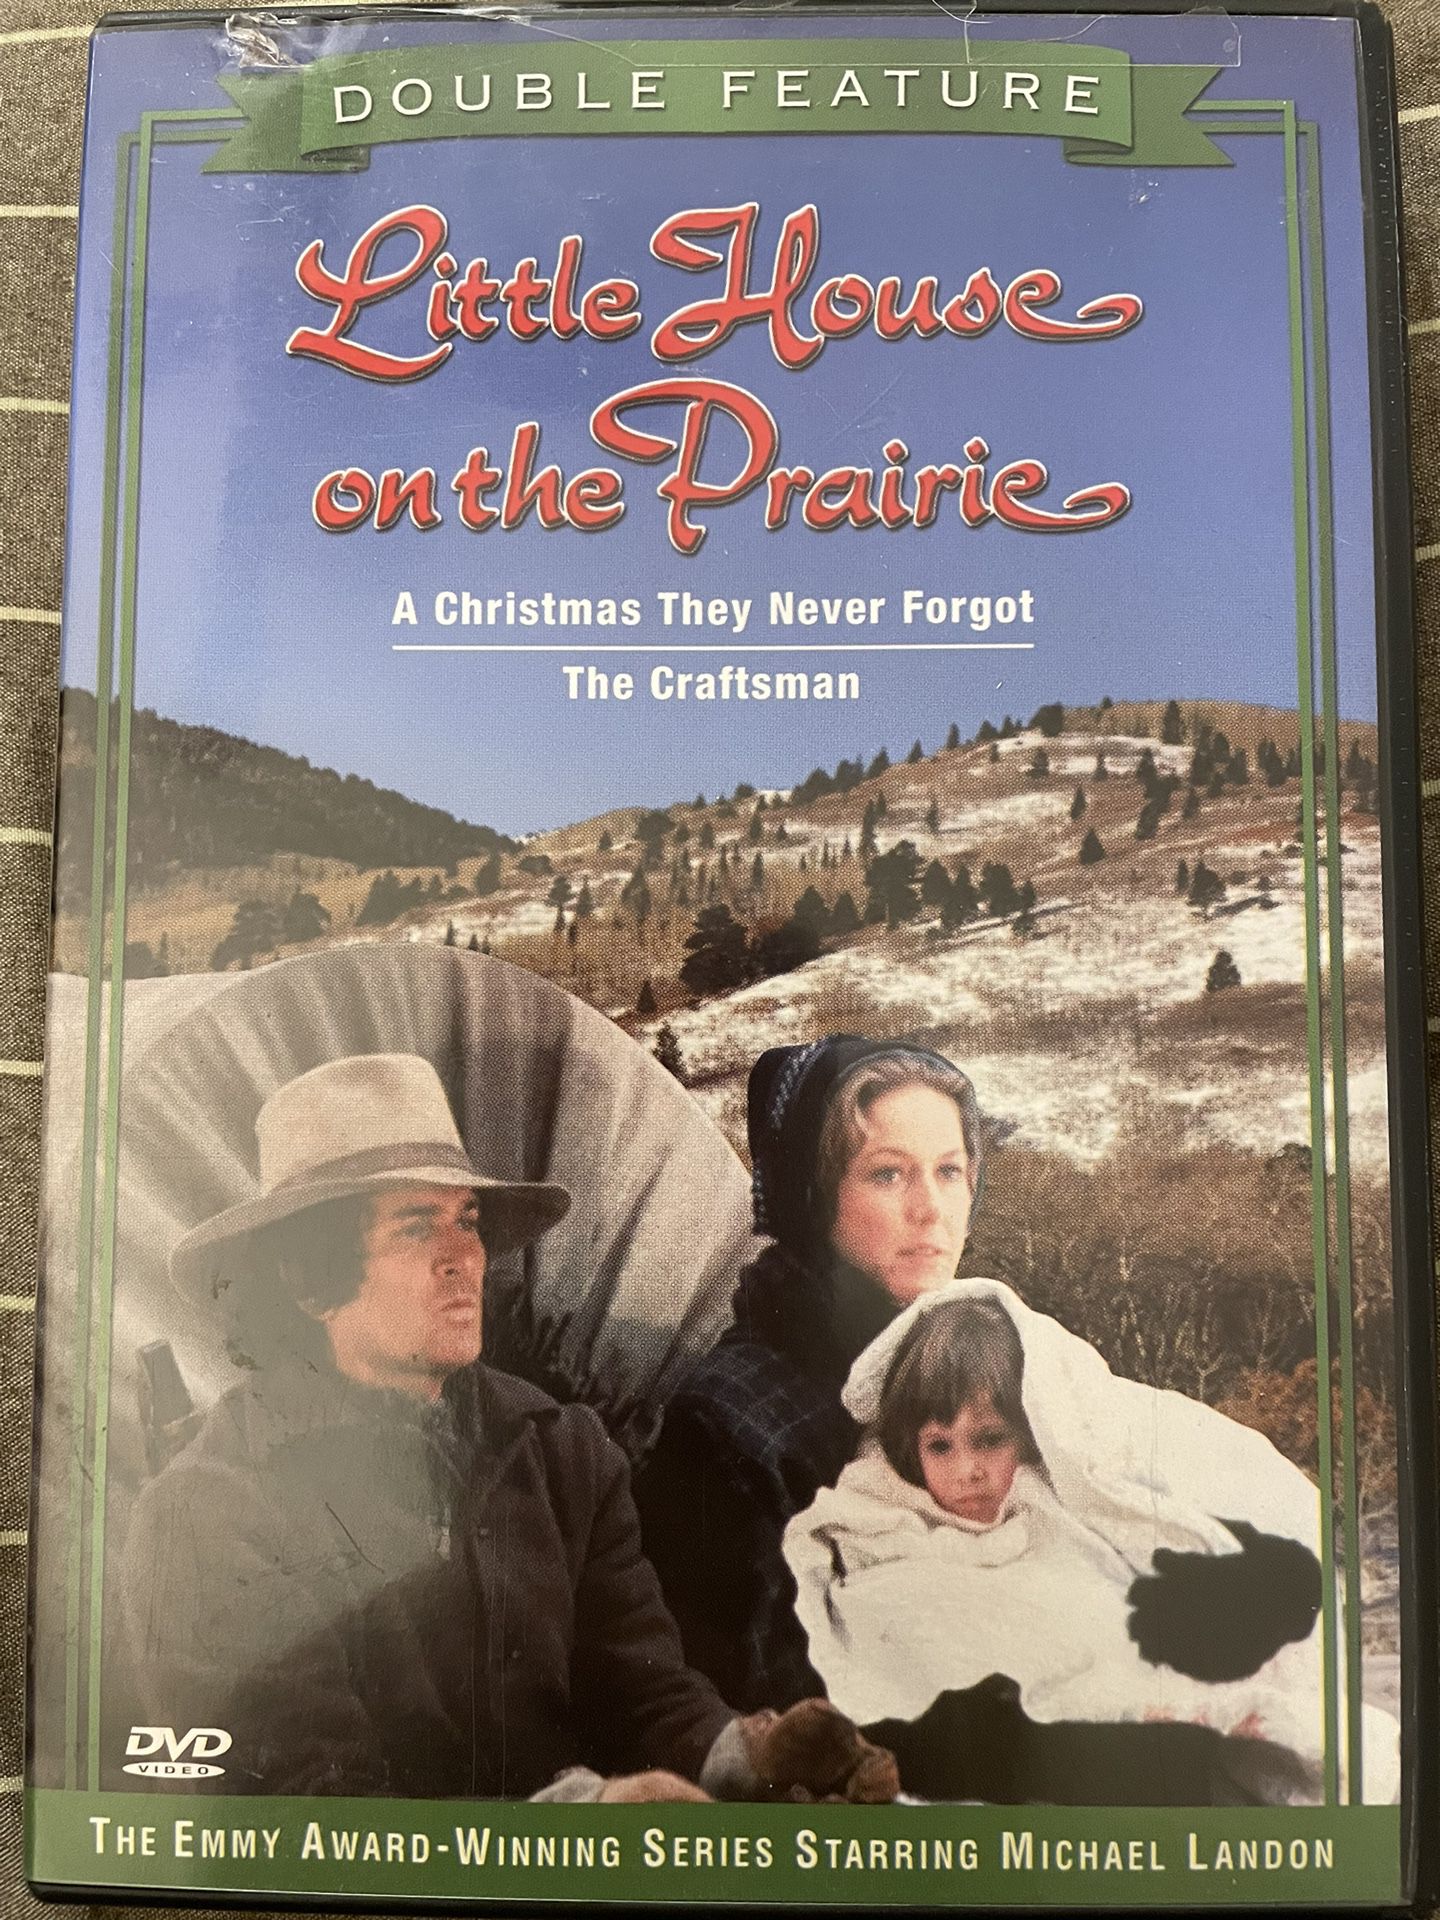 LITTLE HOUSE ON THE PRAIRIE DOUBLE FEATURE (DVD) 